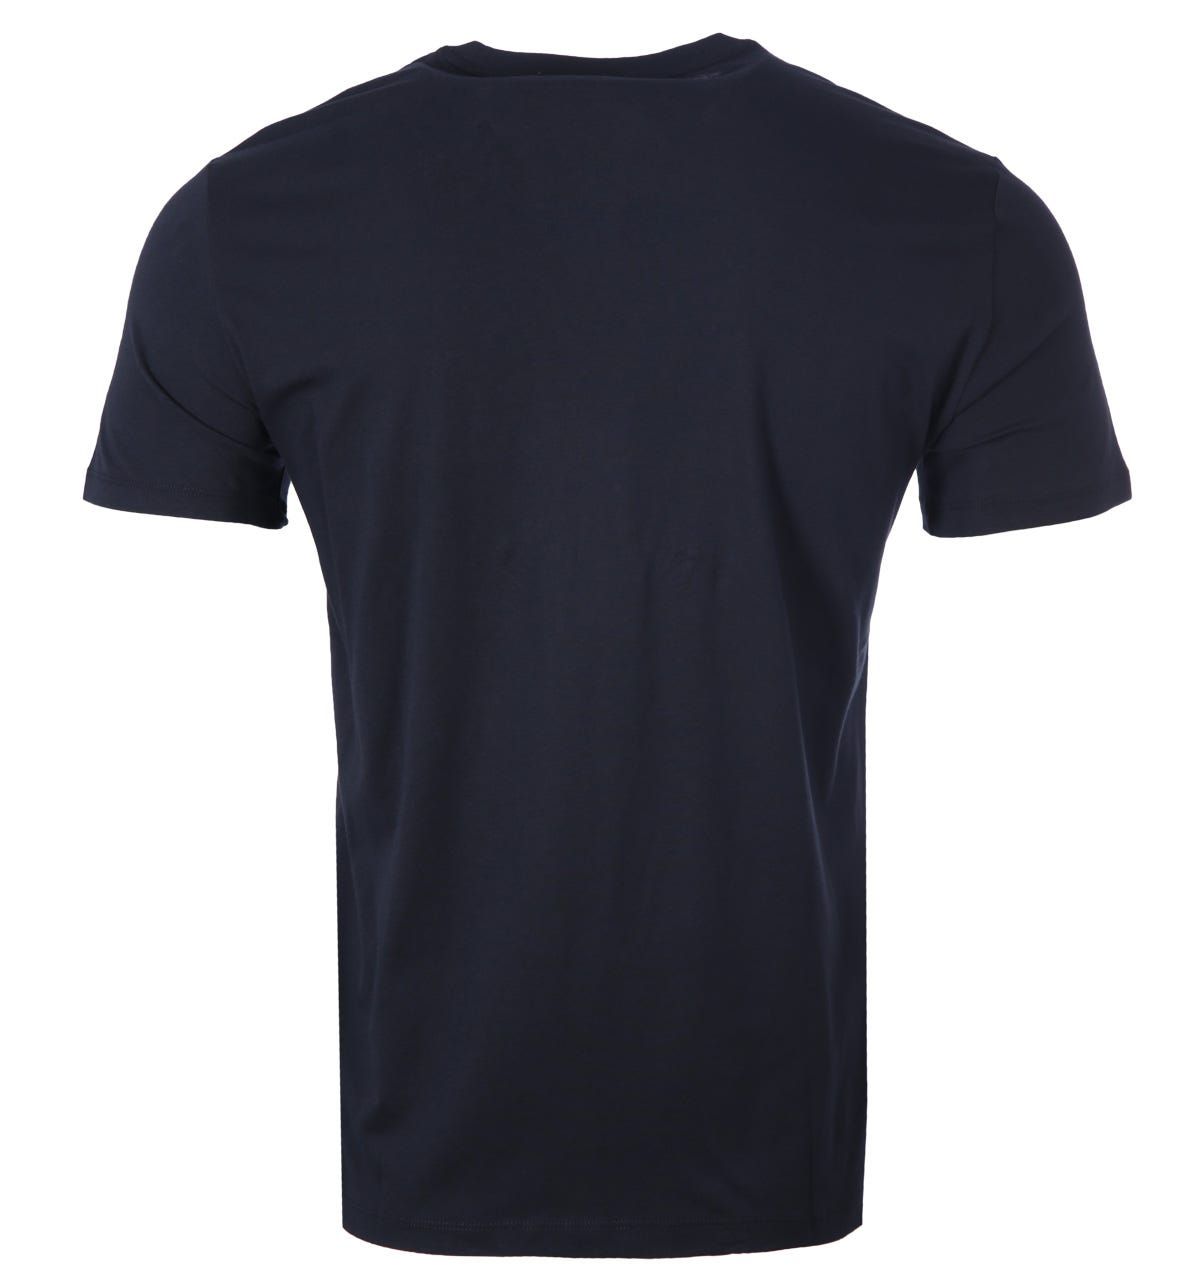 Step up your t-shirt game this season with Armani Exchange. This regular fit t-shirt is crafted from a super soft cotton jersey and is the perfect addition for your logo tee collection. Featuring a classic crew neck design with short sleeves, finished with a large Armani Exchange leather and embossed logo at centre chest.
Regular Fit, Stretch Cotton Jersey, Ribbed Crew Neck, Short Sleeves, Leather & Embossed Branding , Armani Exchange Branding. Style & Fit: Regular Fit, Fits True to Size.
 Composition & Care:100% Cotton, Machine Wash.